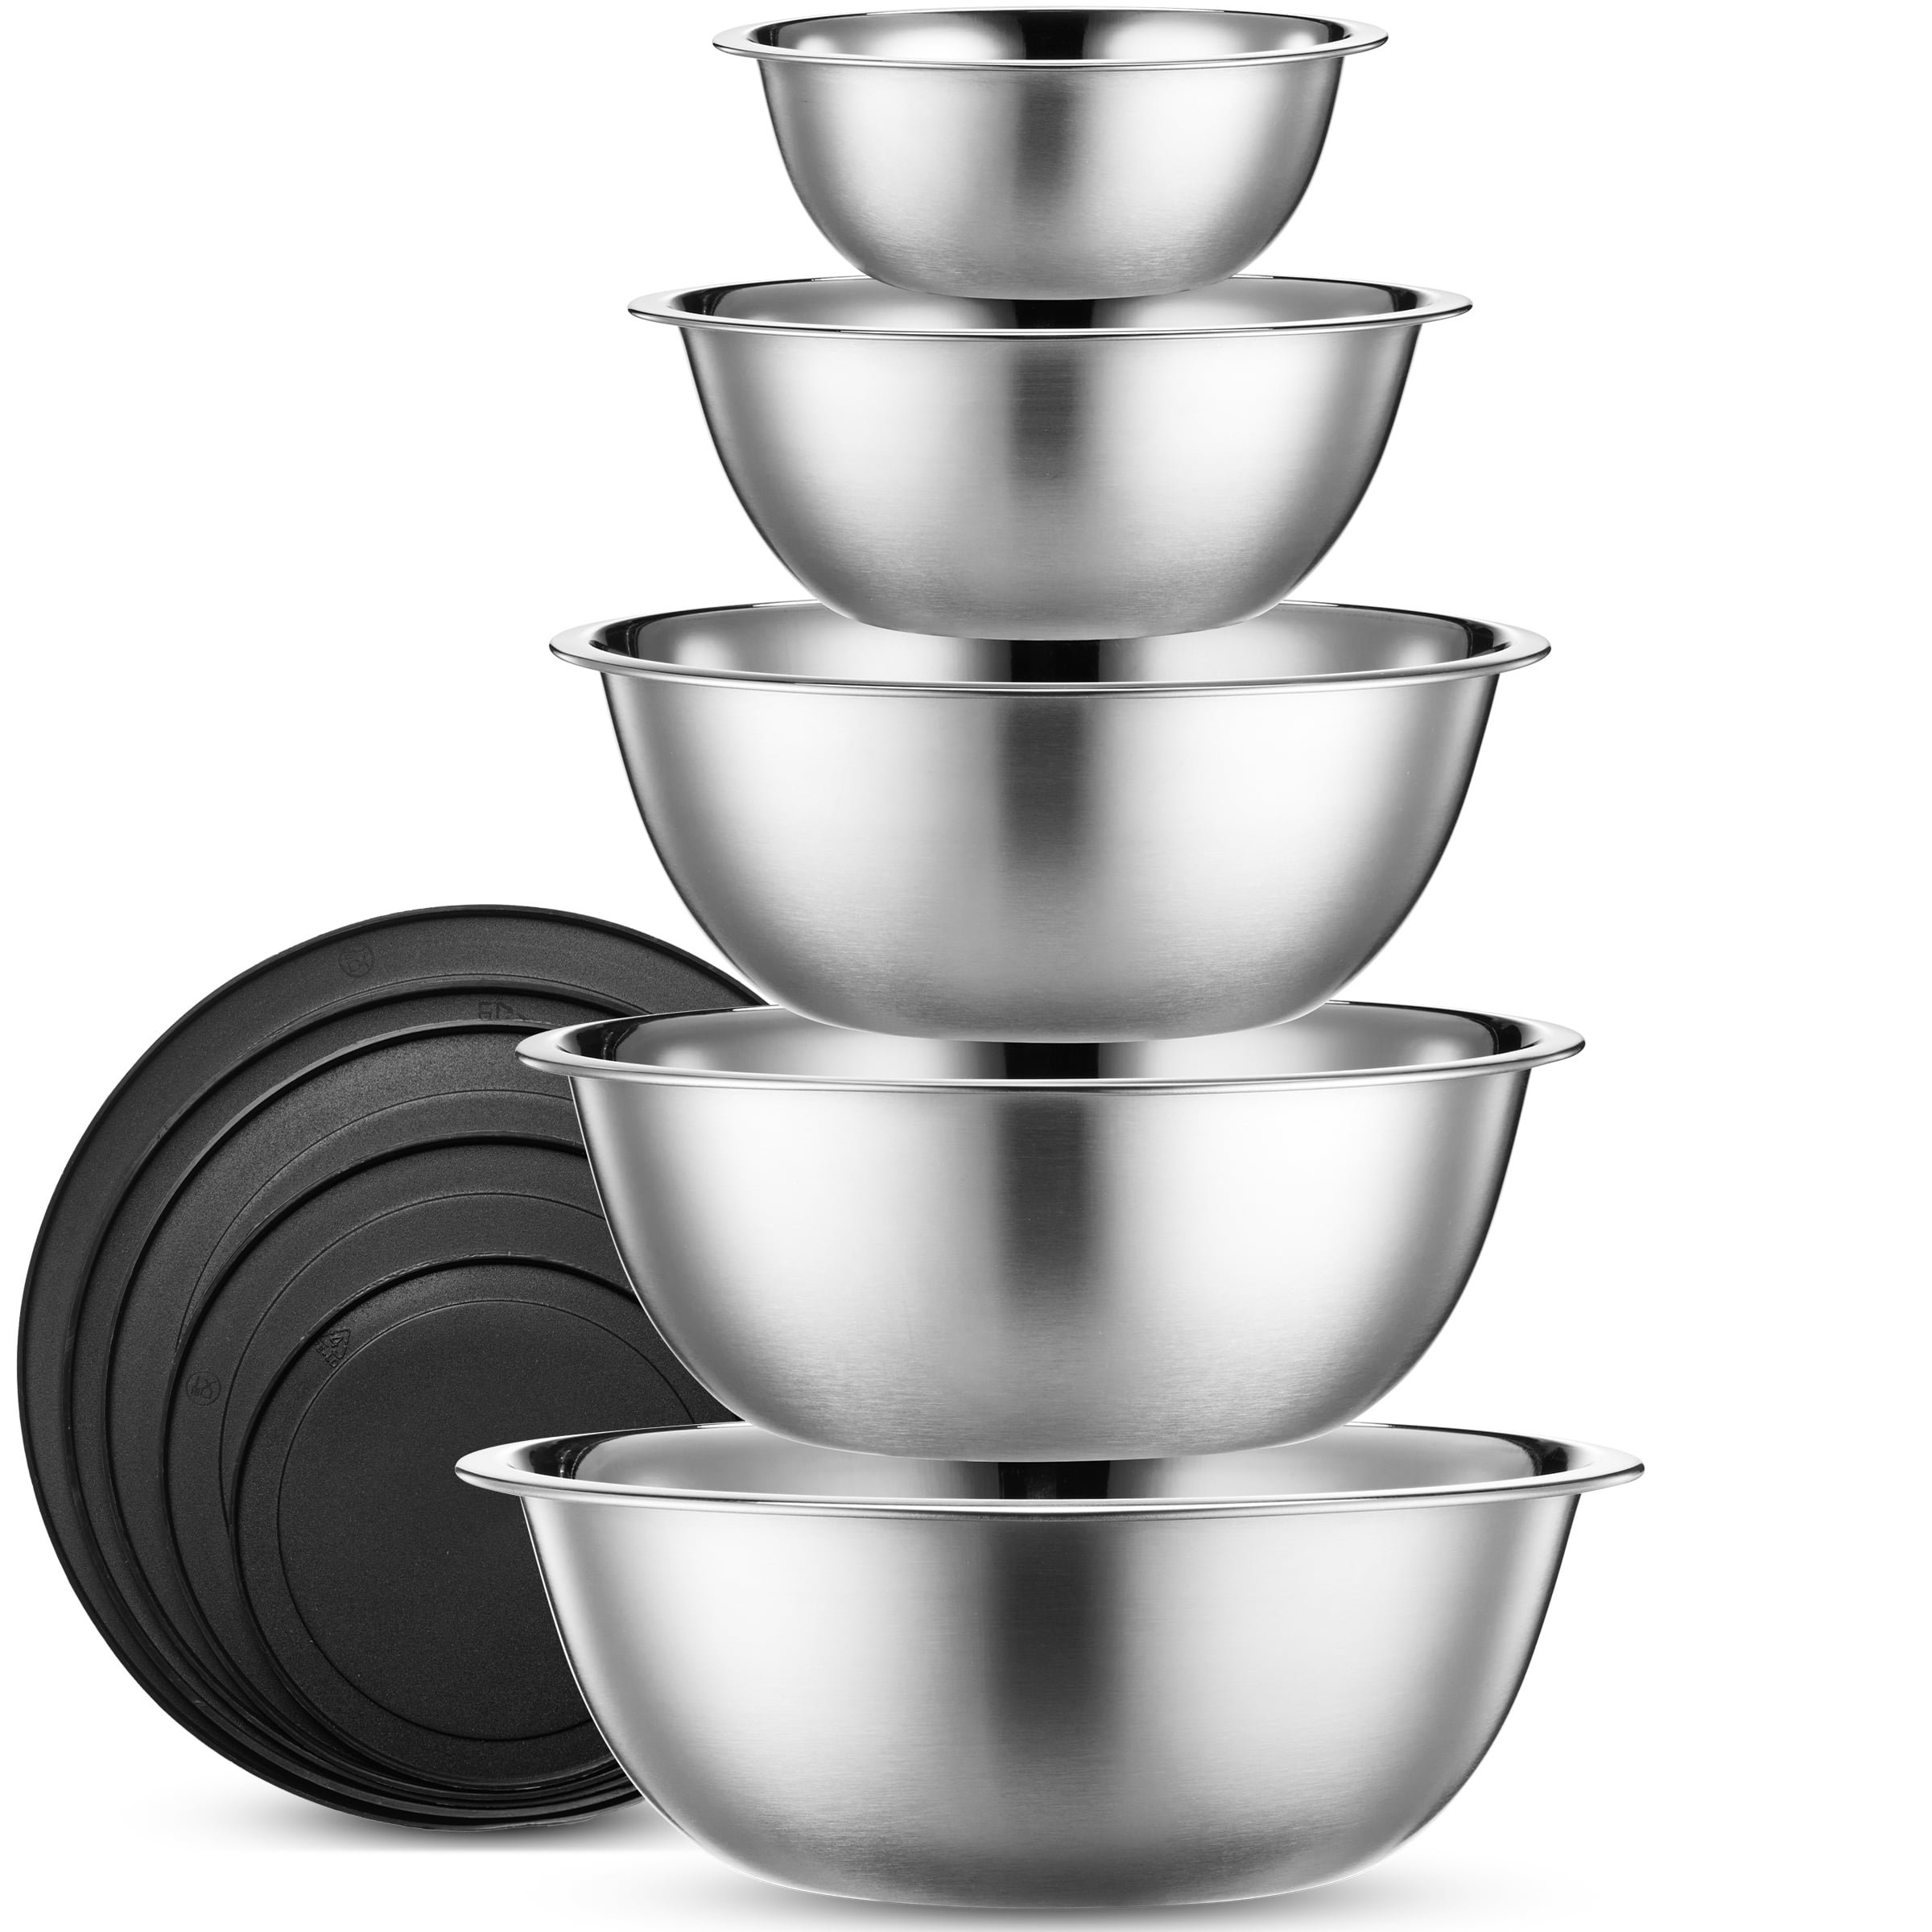 Cool Care Stainless Steel Mixing Bowl & Whisk Set, Heavy Duty Non Slip SS Metal - Mini, Compact, Small Stackable Nesting - Best for Mixer, Salad